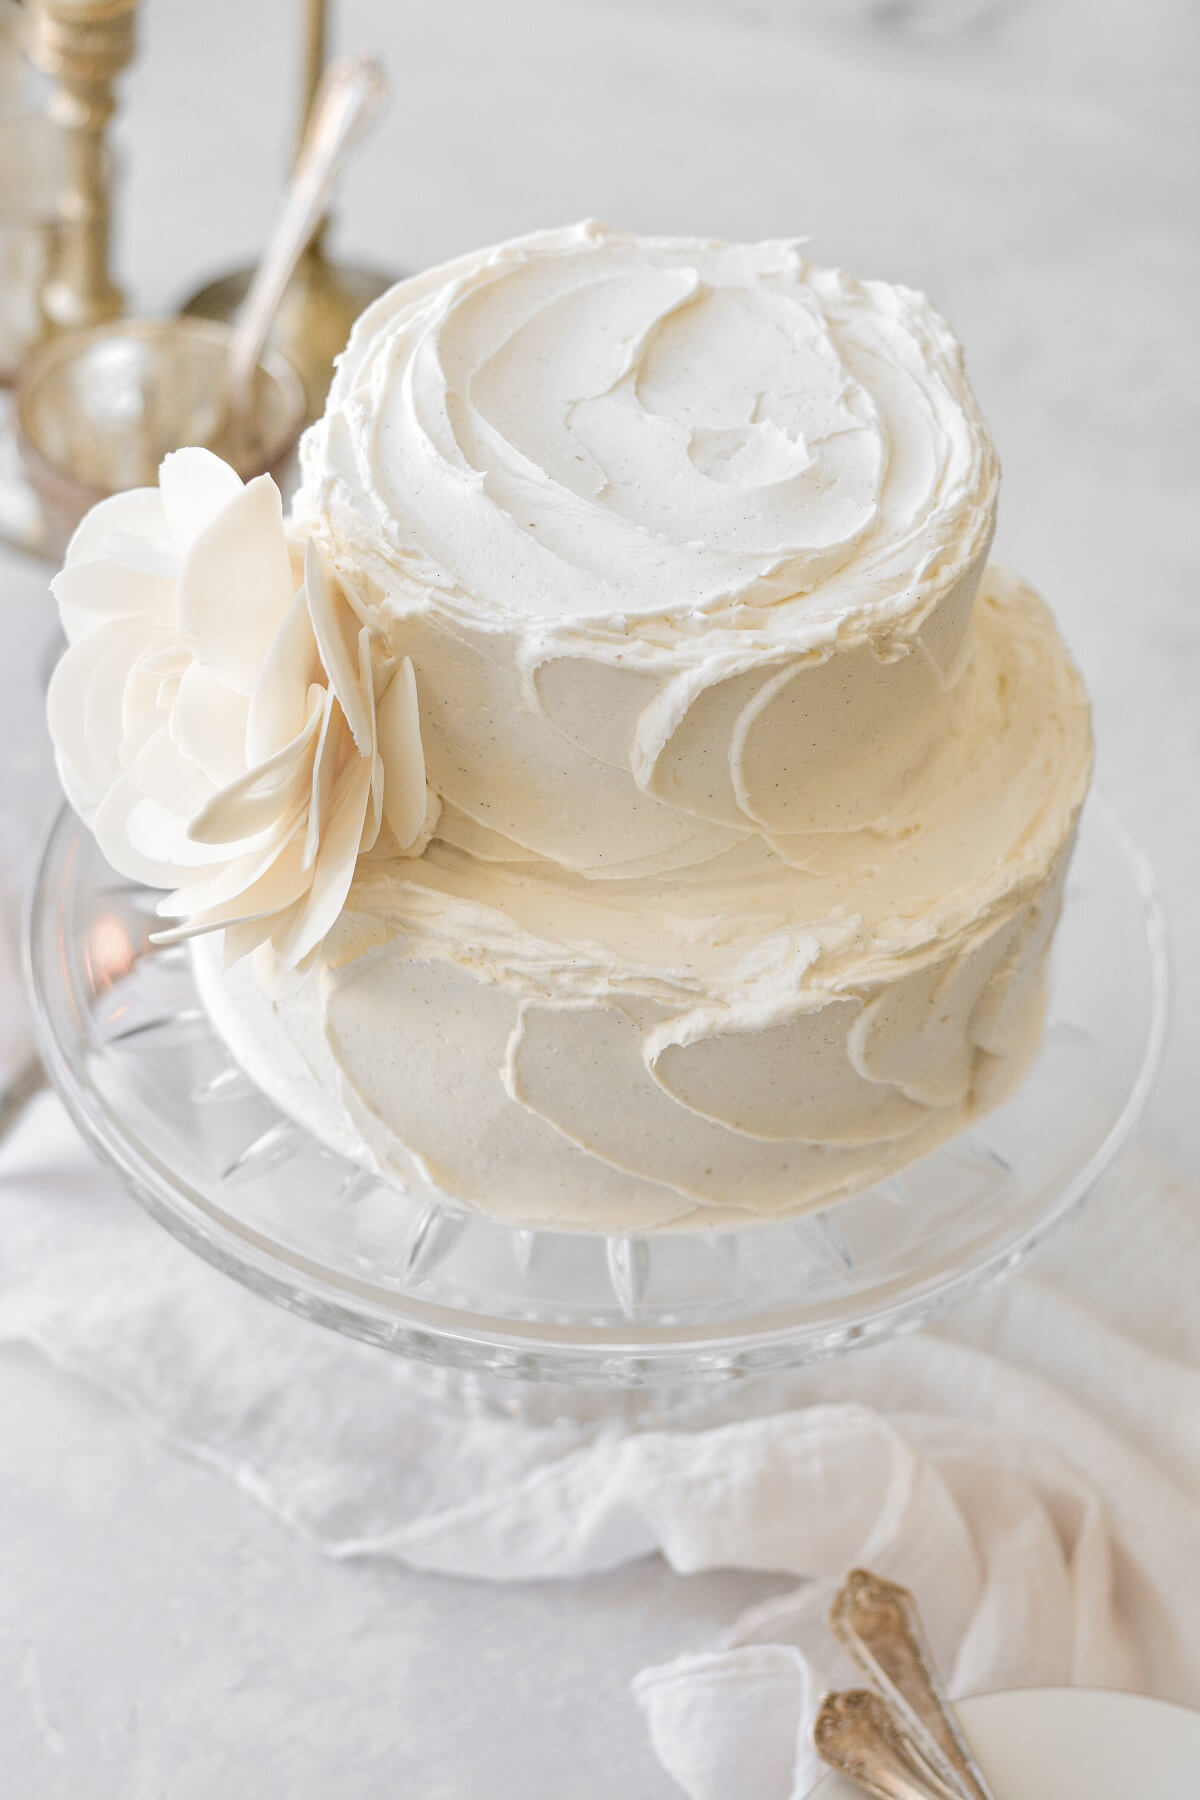 A two-tiered almond wedding cake with a white chocolate rose.